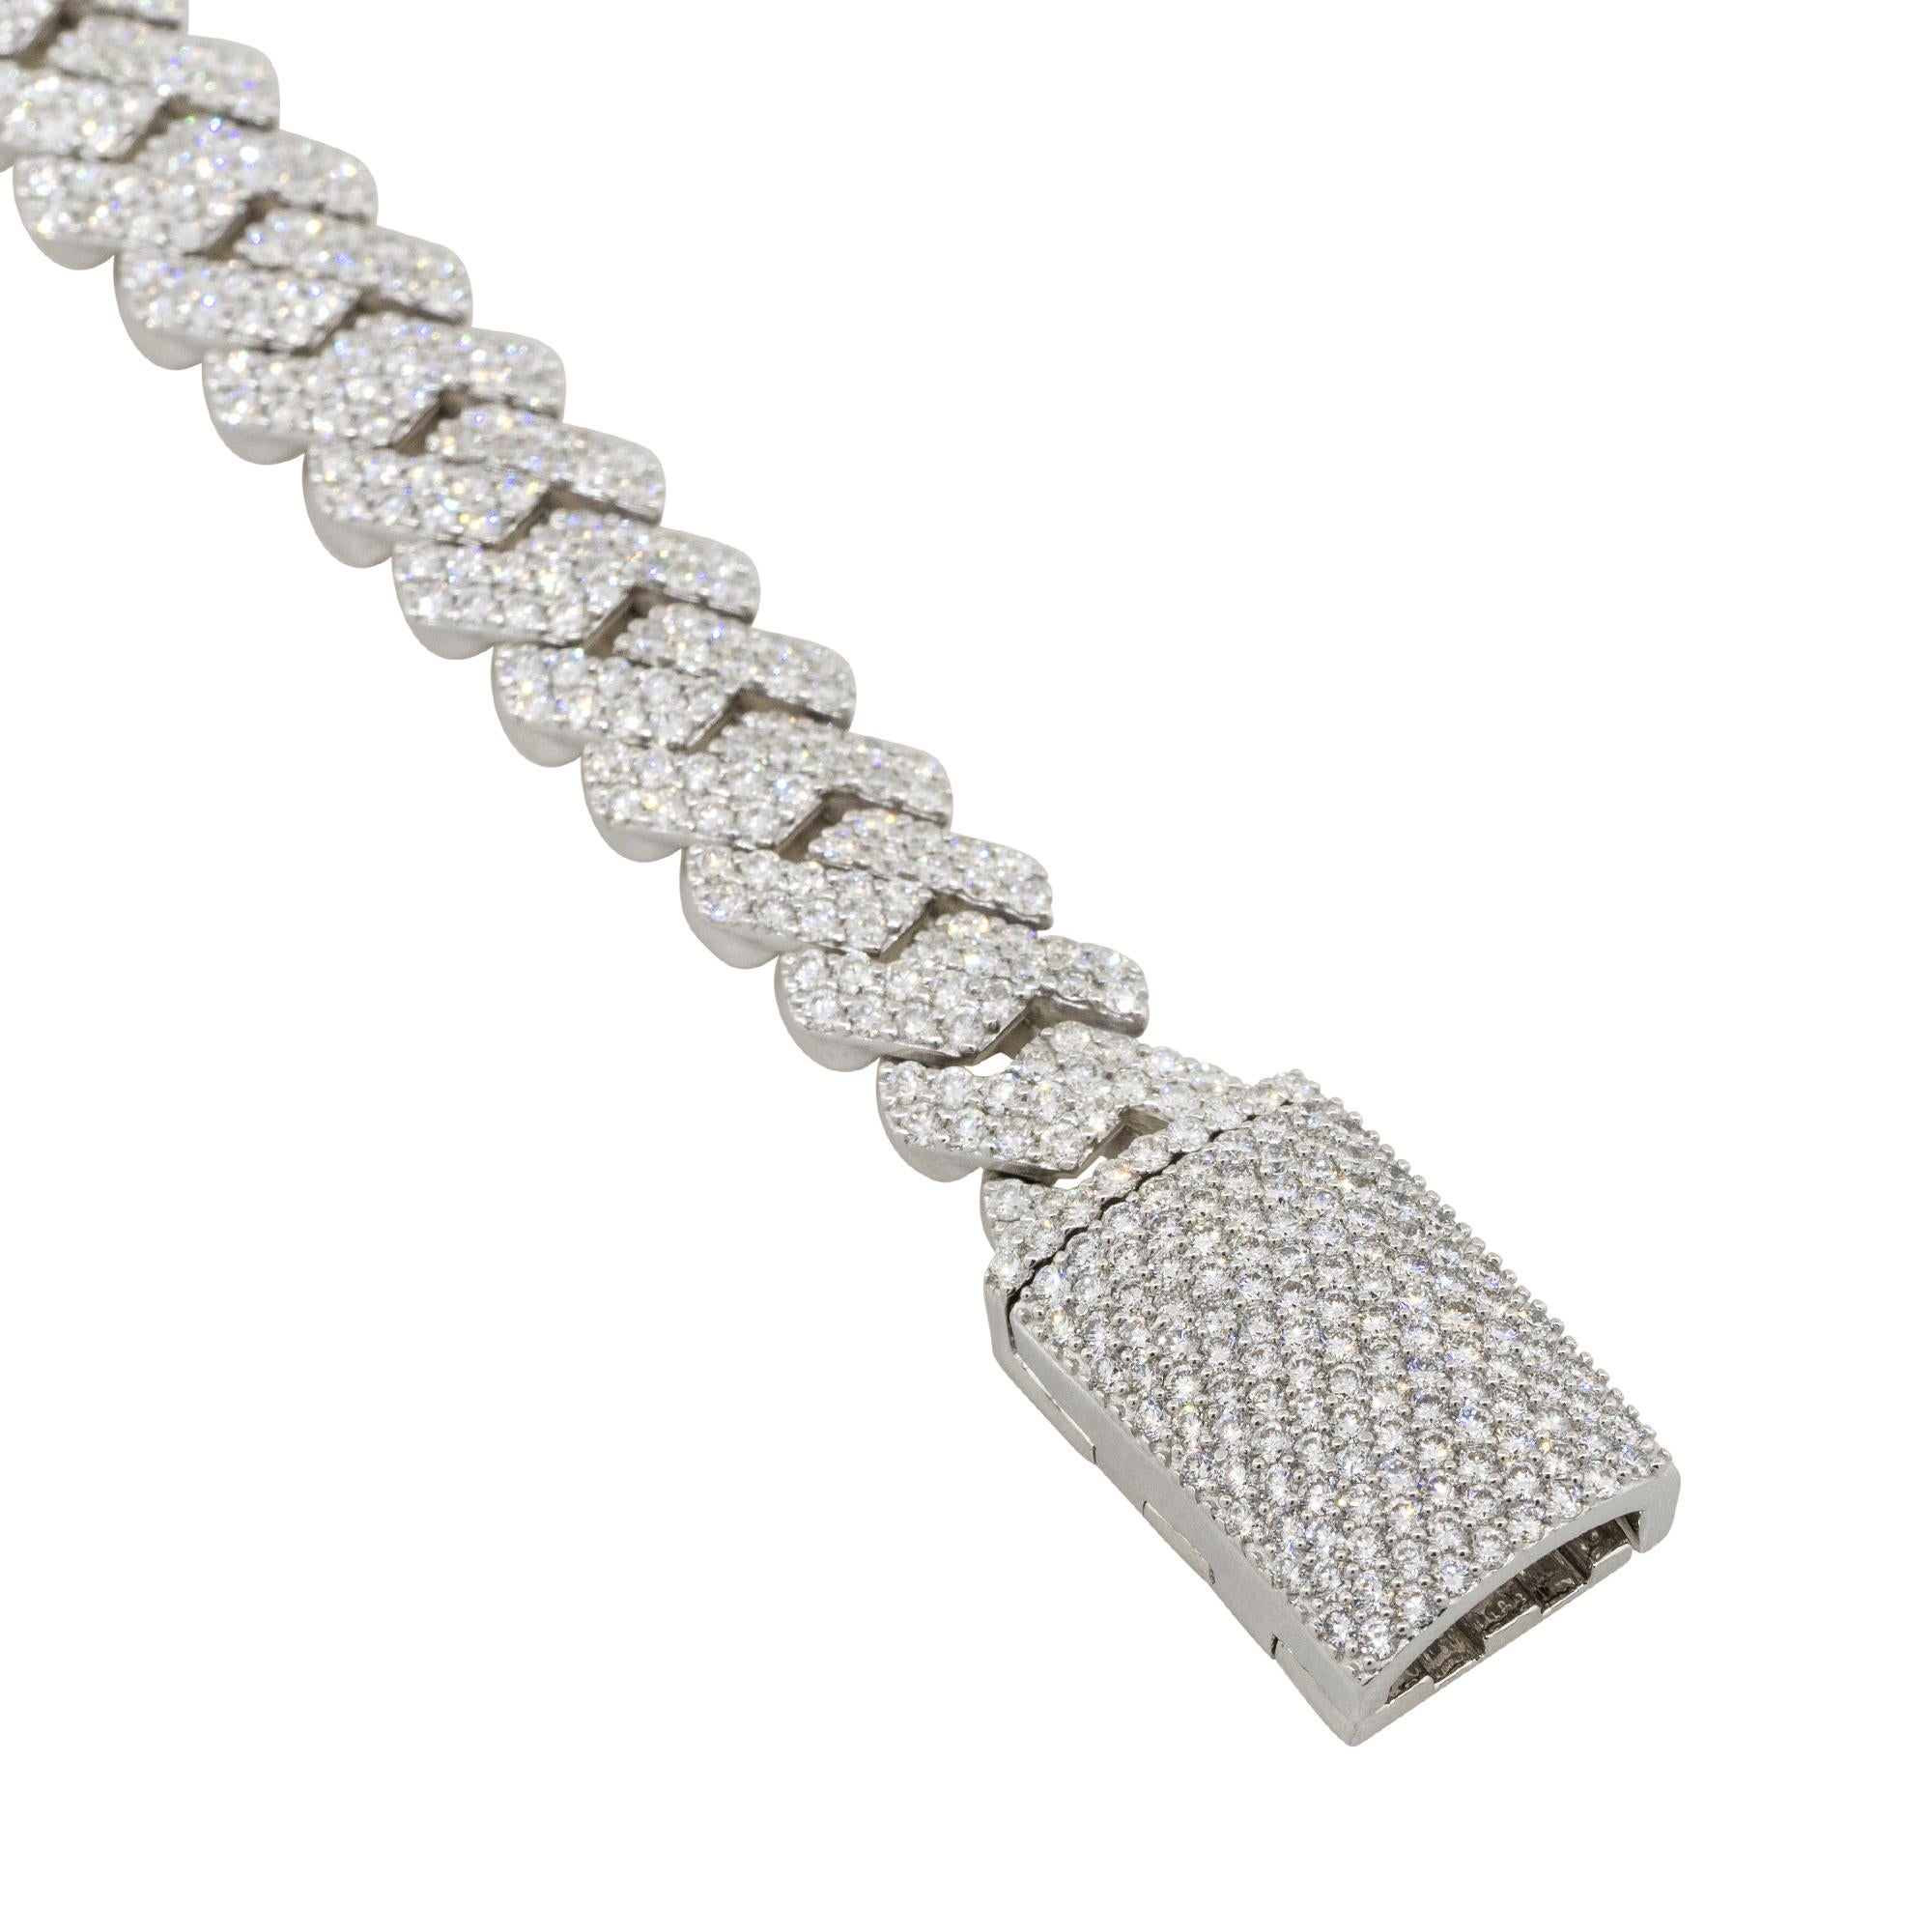 7.43 Carat Diamond All Paved Cuban Chain Link Bracelet 14 Karat In Stock In New Condition For Sale In Boca Raton, FL